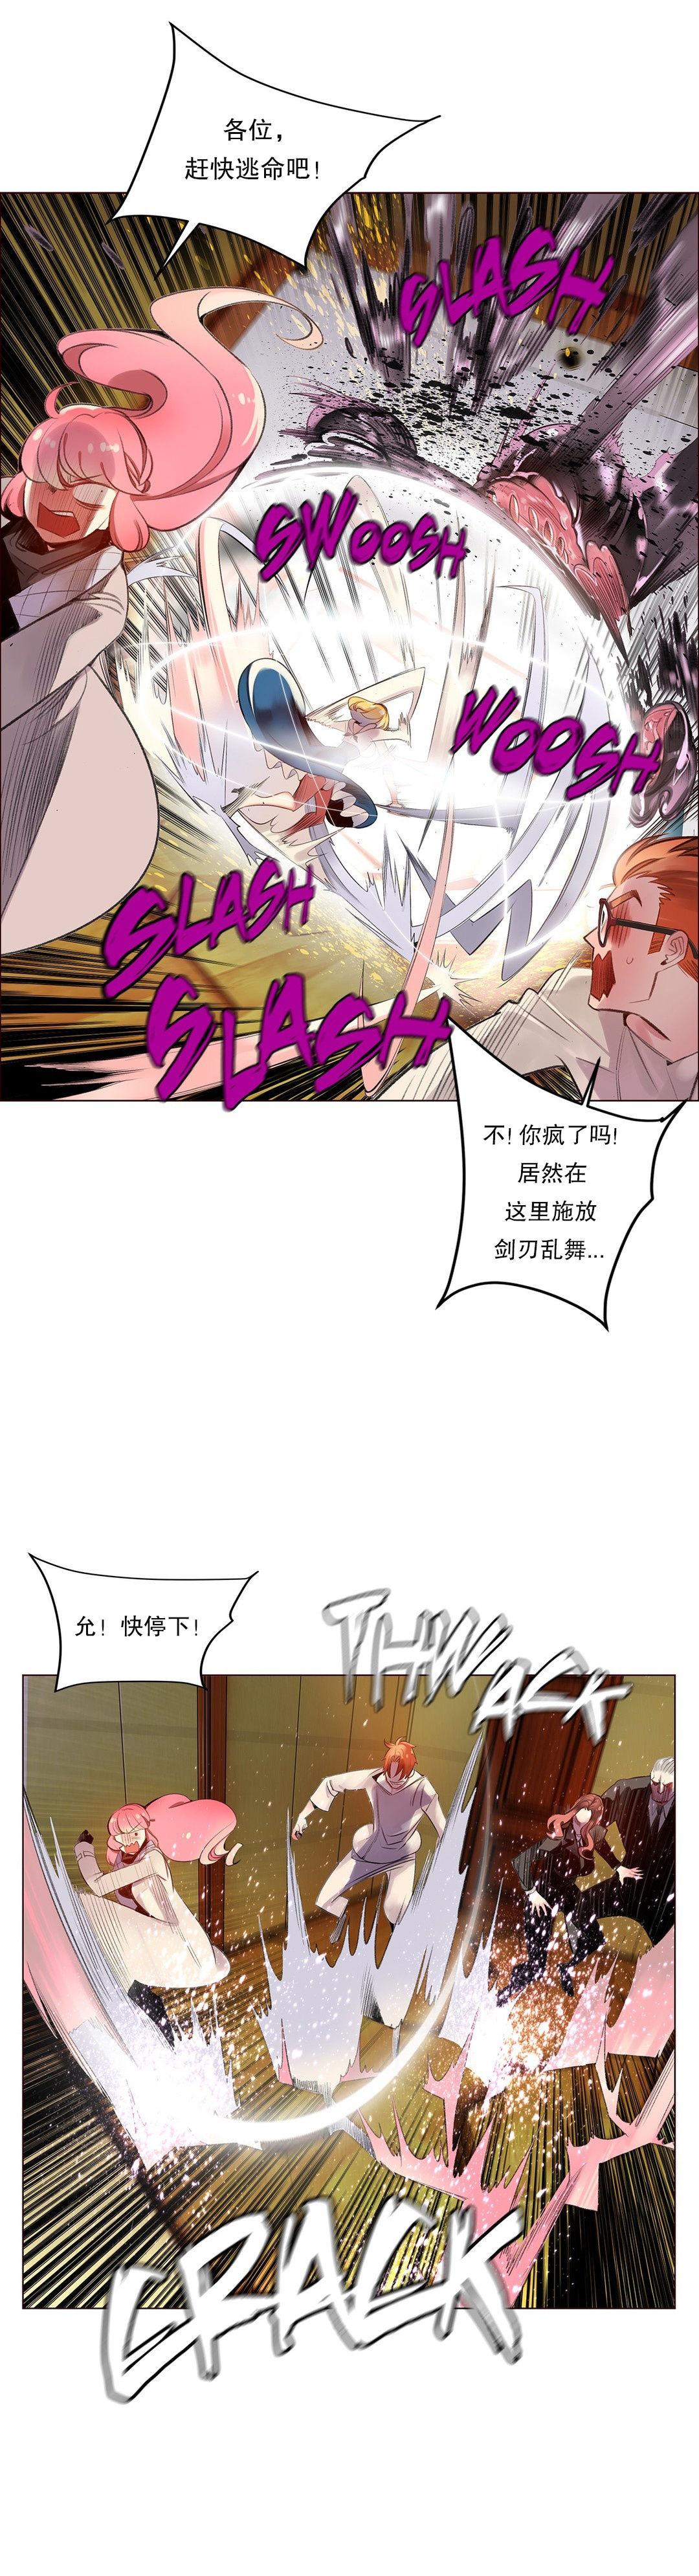 [Juder] Lilith`s Cord (第二季) Ch.61-65 [Chinese] [aaatwist个人汉化] [Ongoing] 161